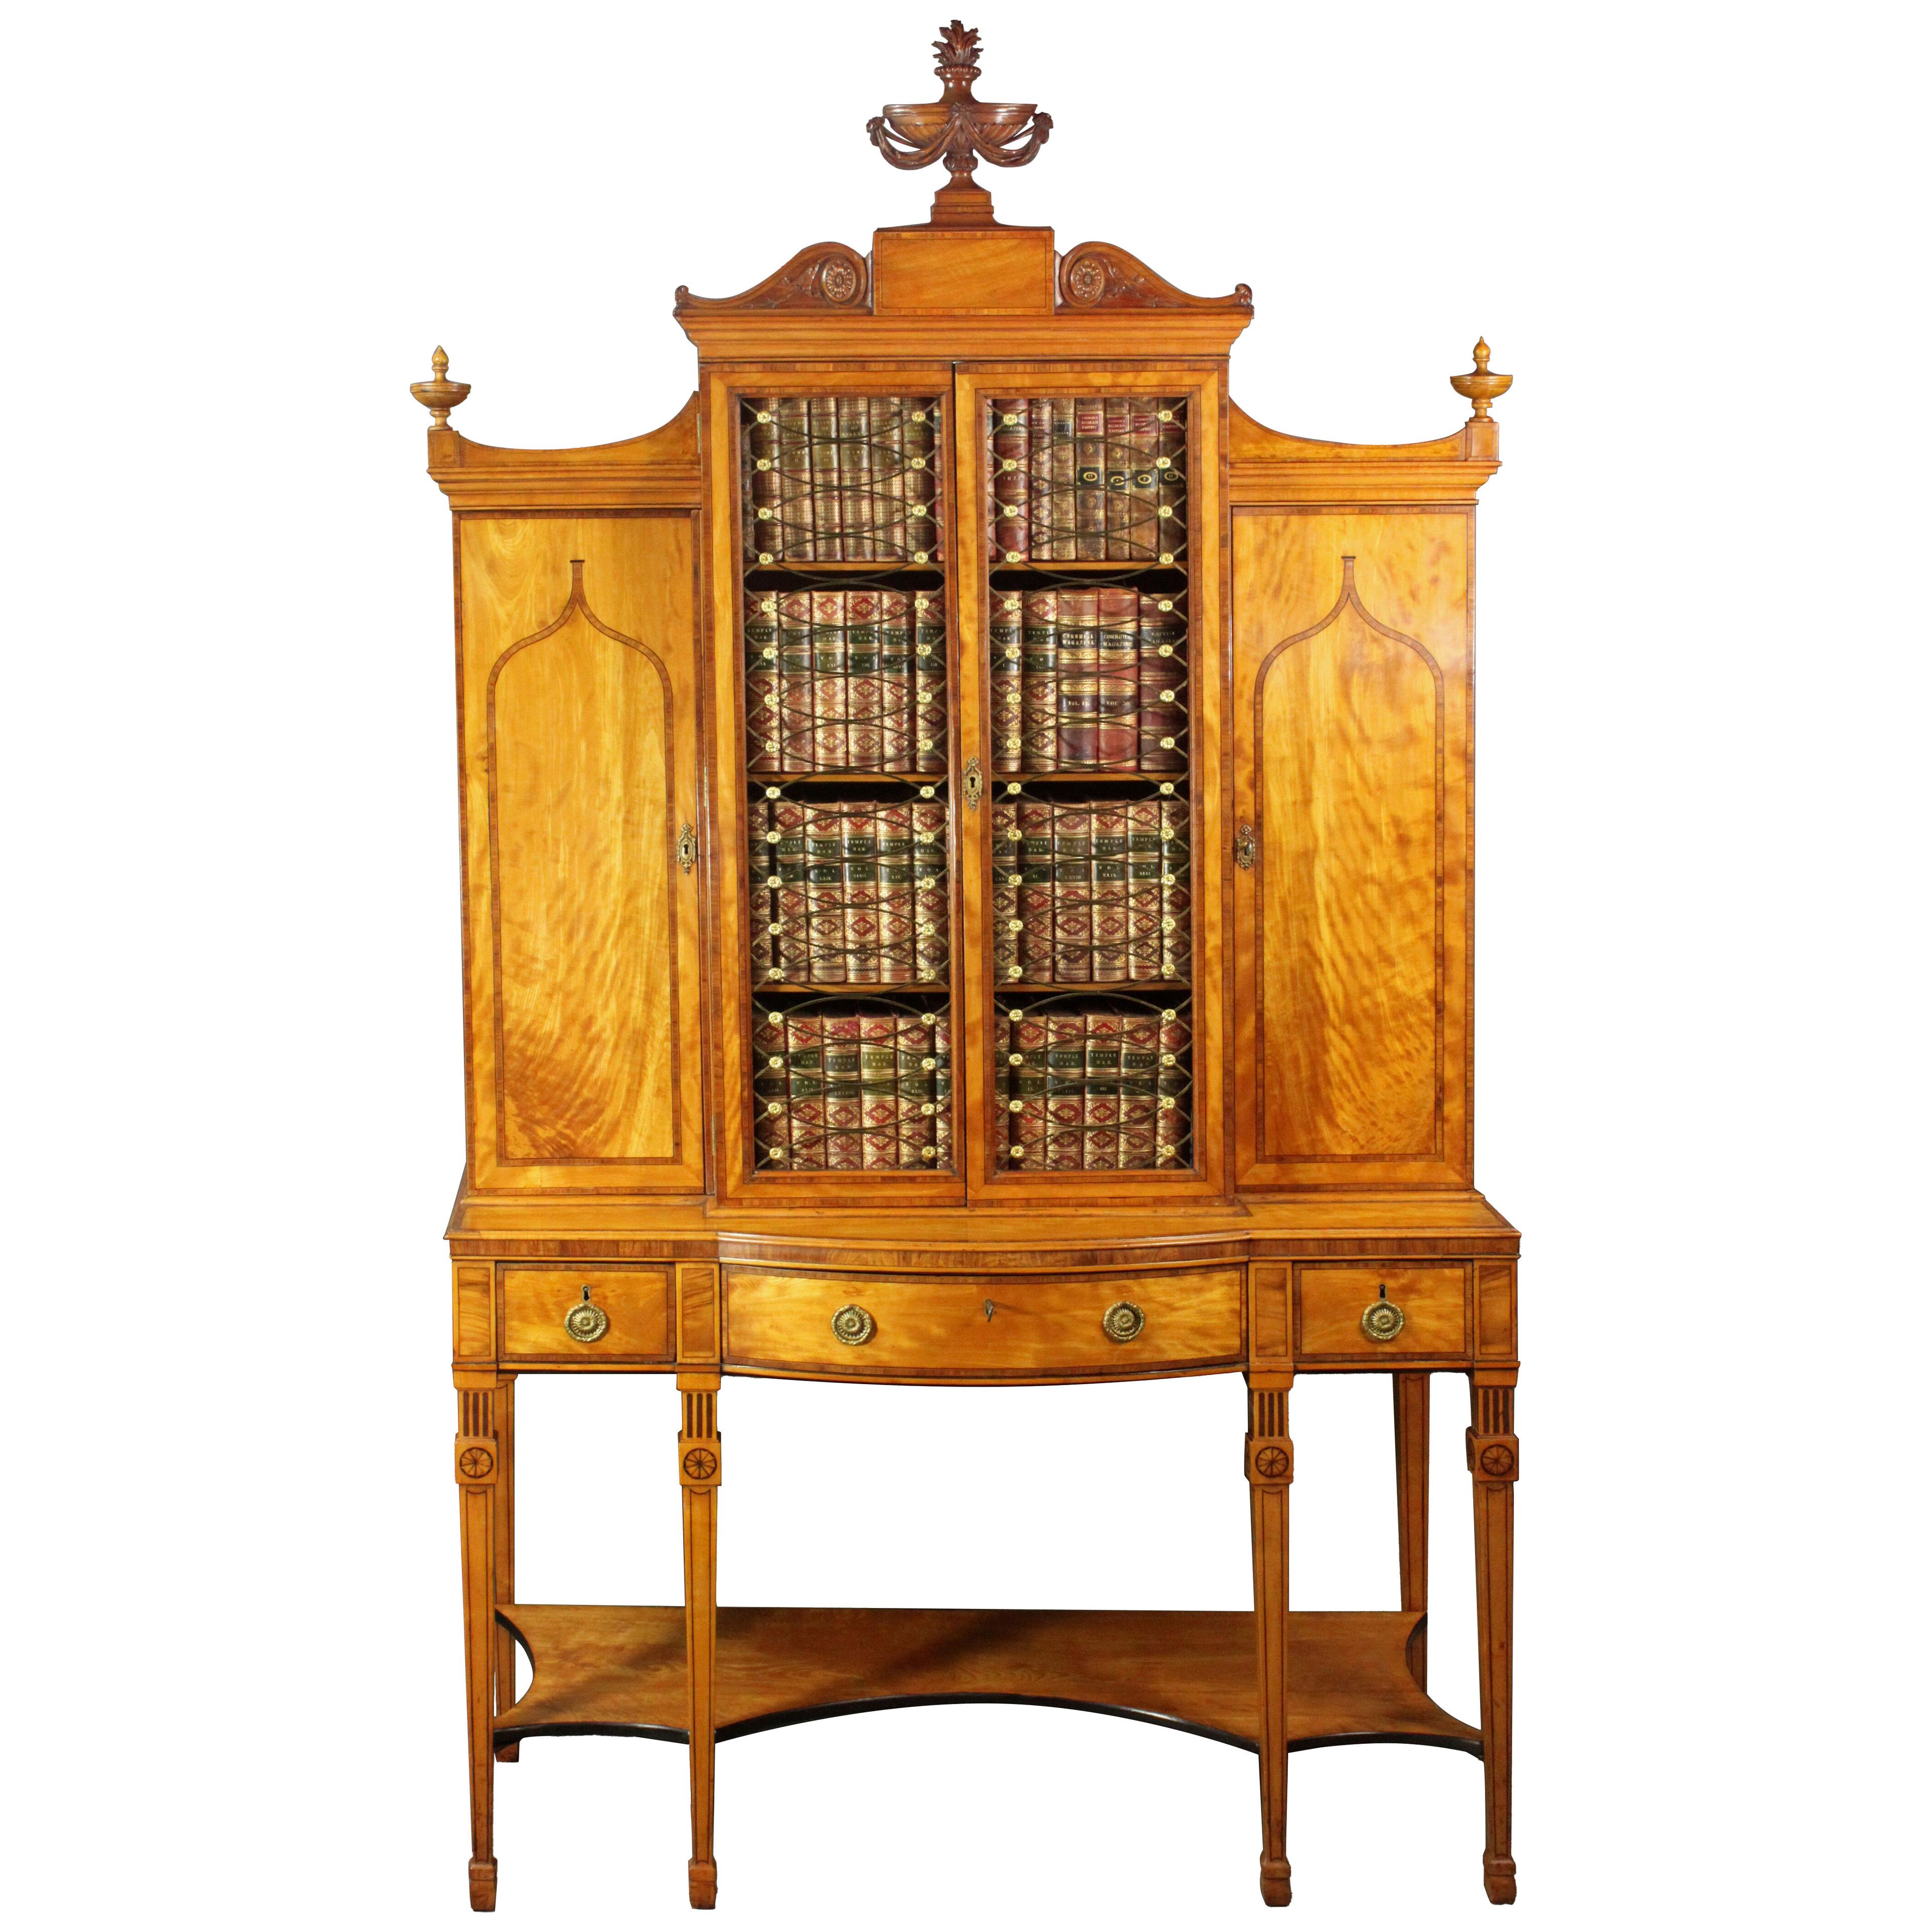 George III satinwood cabinet in the manner of Thomas Sheraton